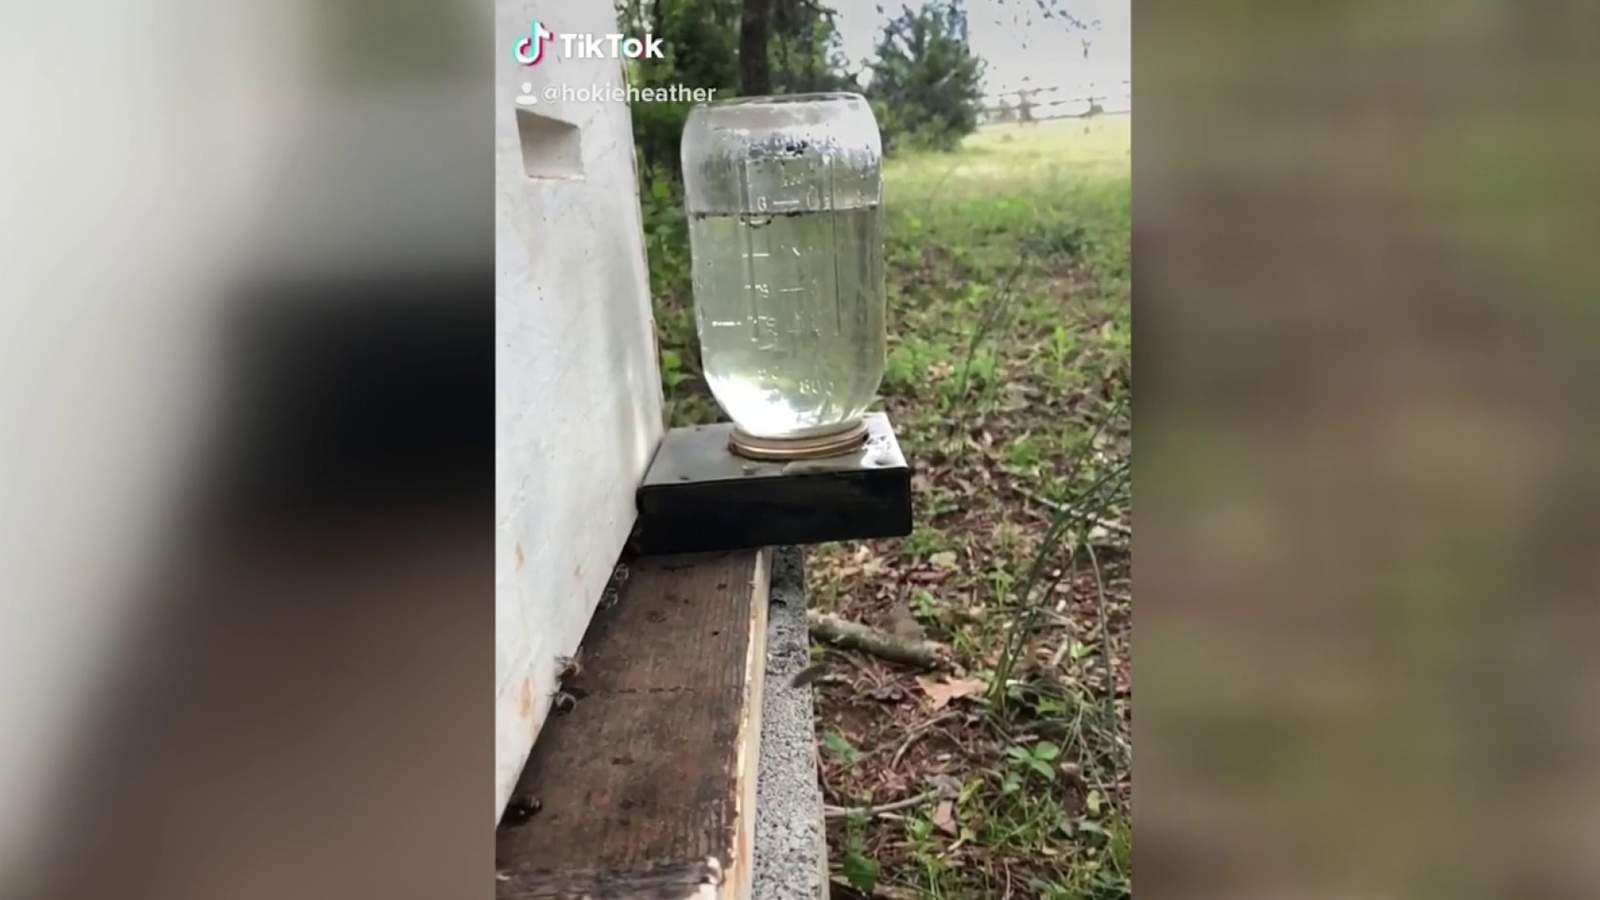 'The video is hilarious ... it makes you feel good’: Bedford County beekeeper goes viral